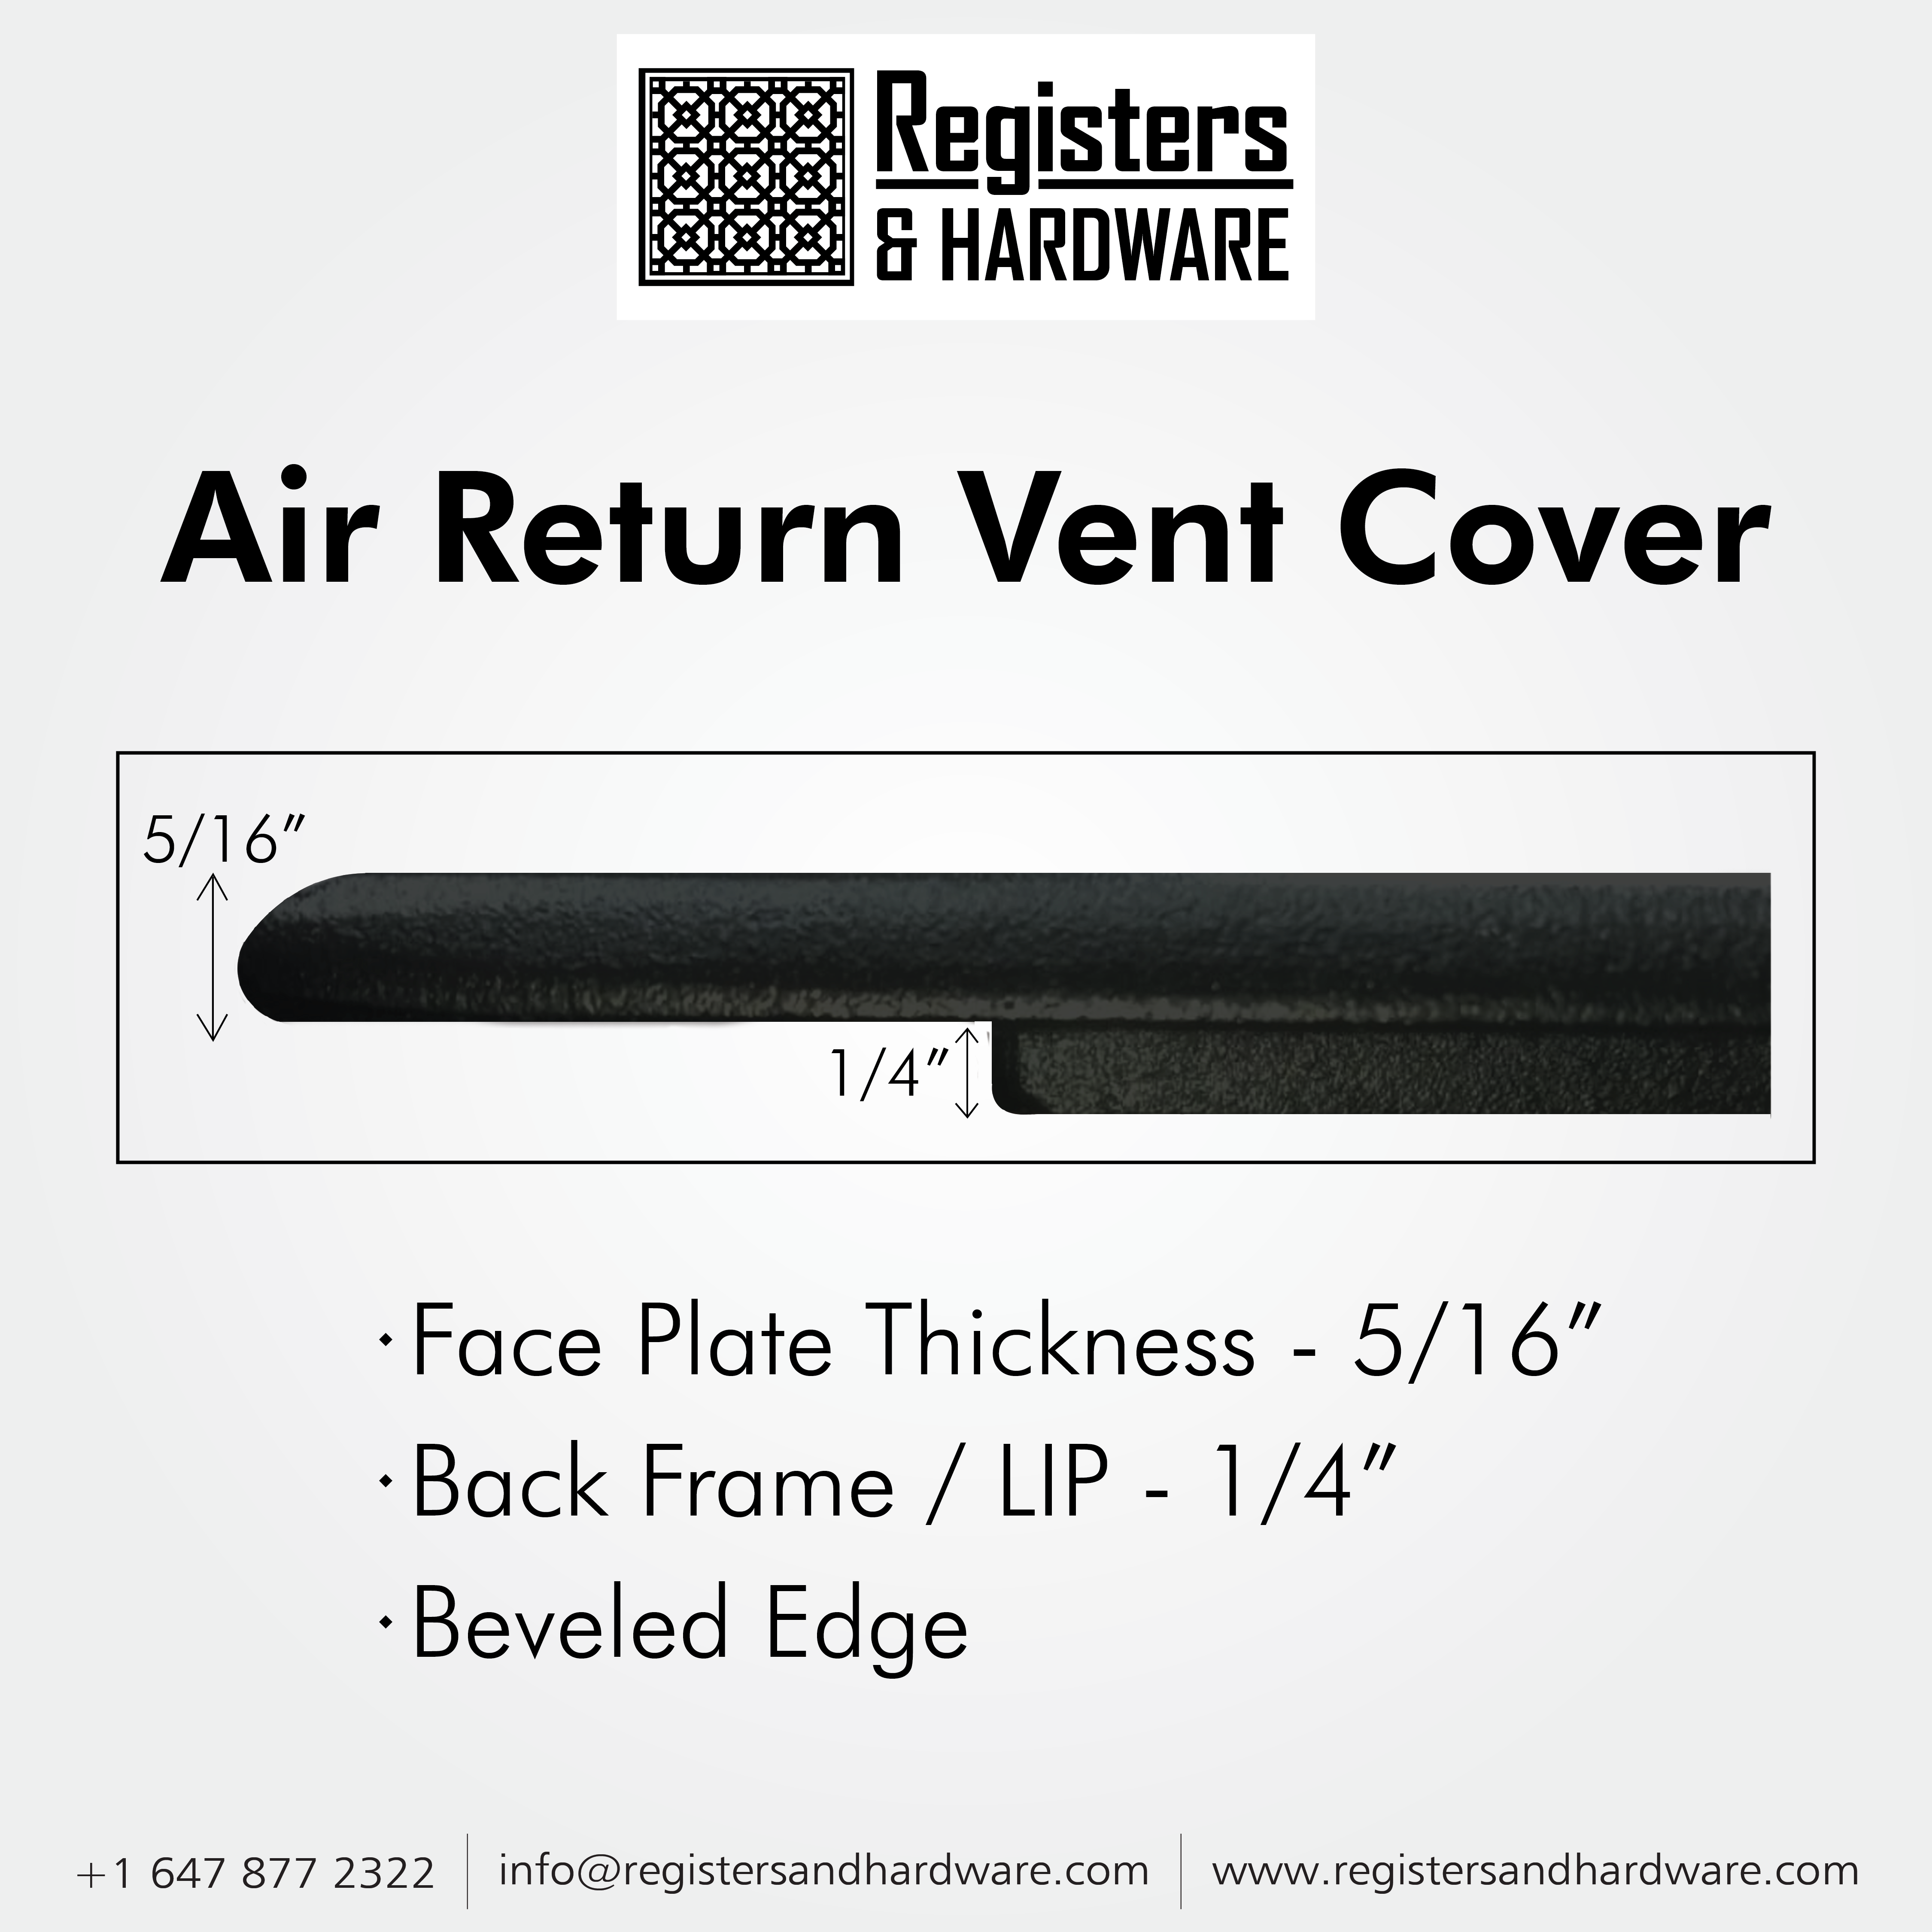 Achtek AIR RETURN 16"x24" Duct Opening (Overall Size 18"x26") | Heavy Cast Aluminum Air Grille HVAC Duct || Powder Coated